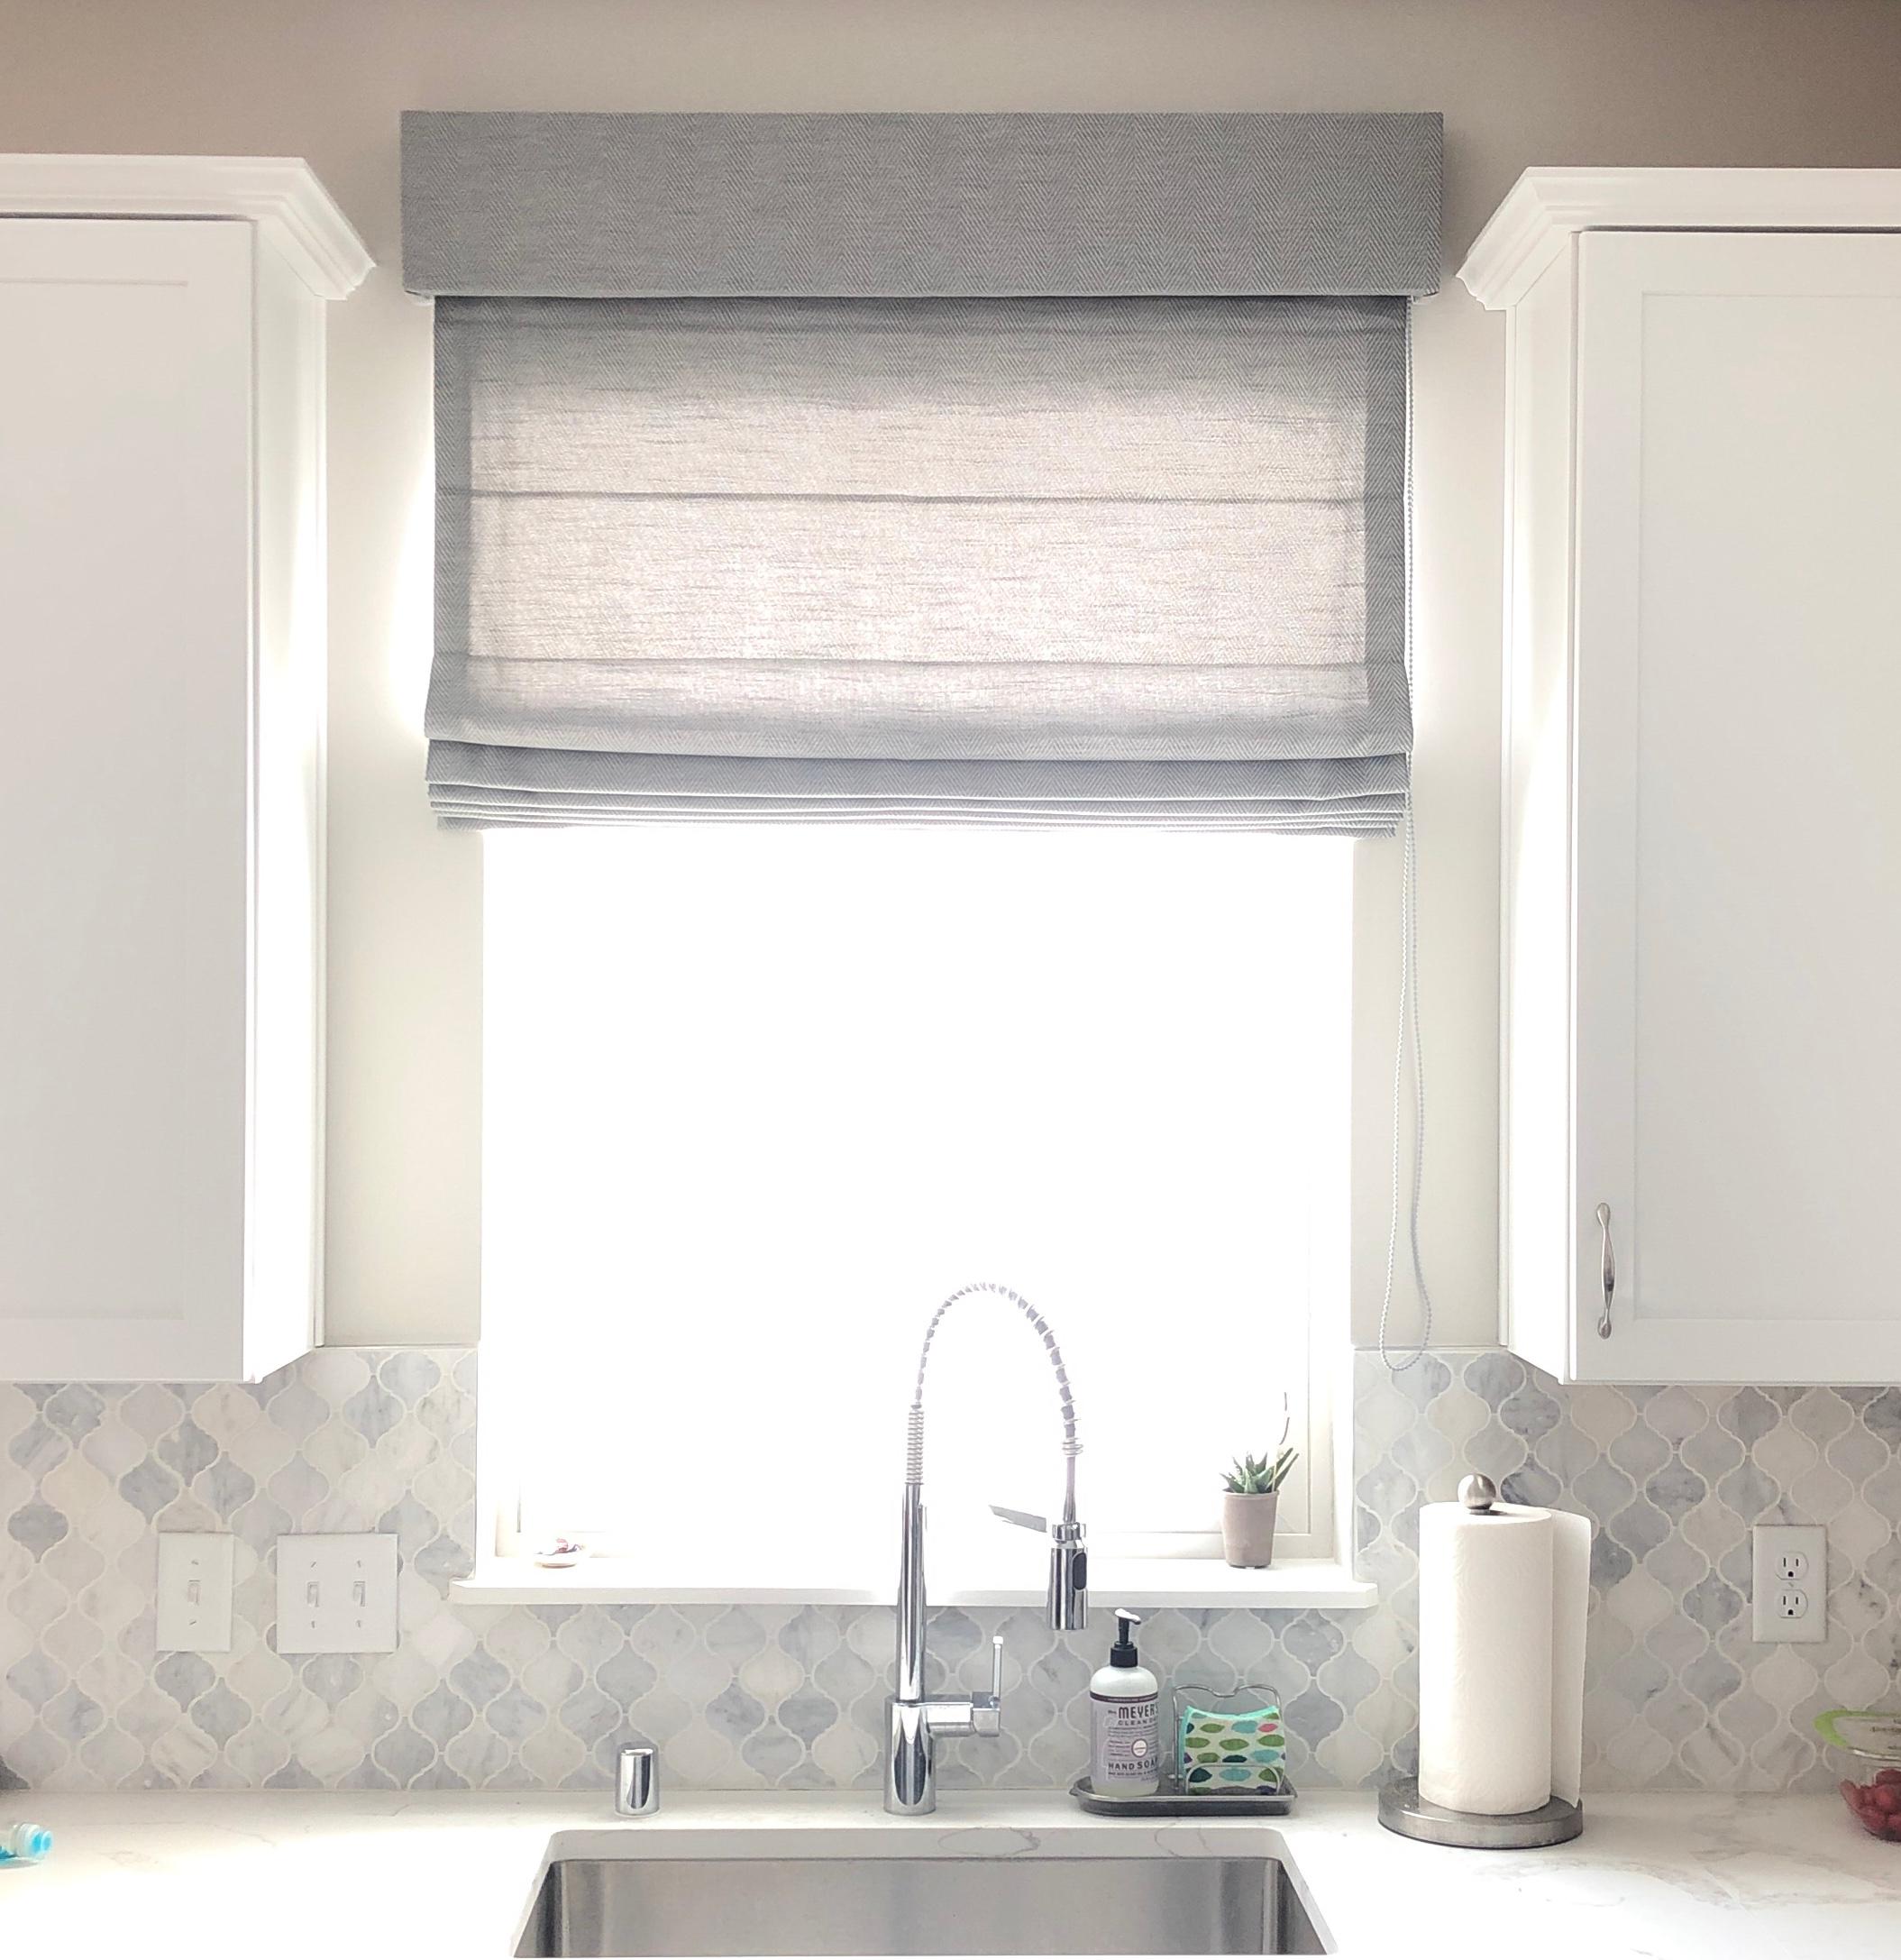 We installed a Roman shade above the kitchen sink in this Victoria home, to add a touch of softness in an area surrounded by hard-edged surfaces.